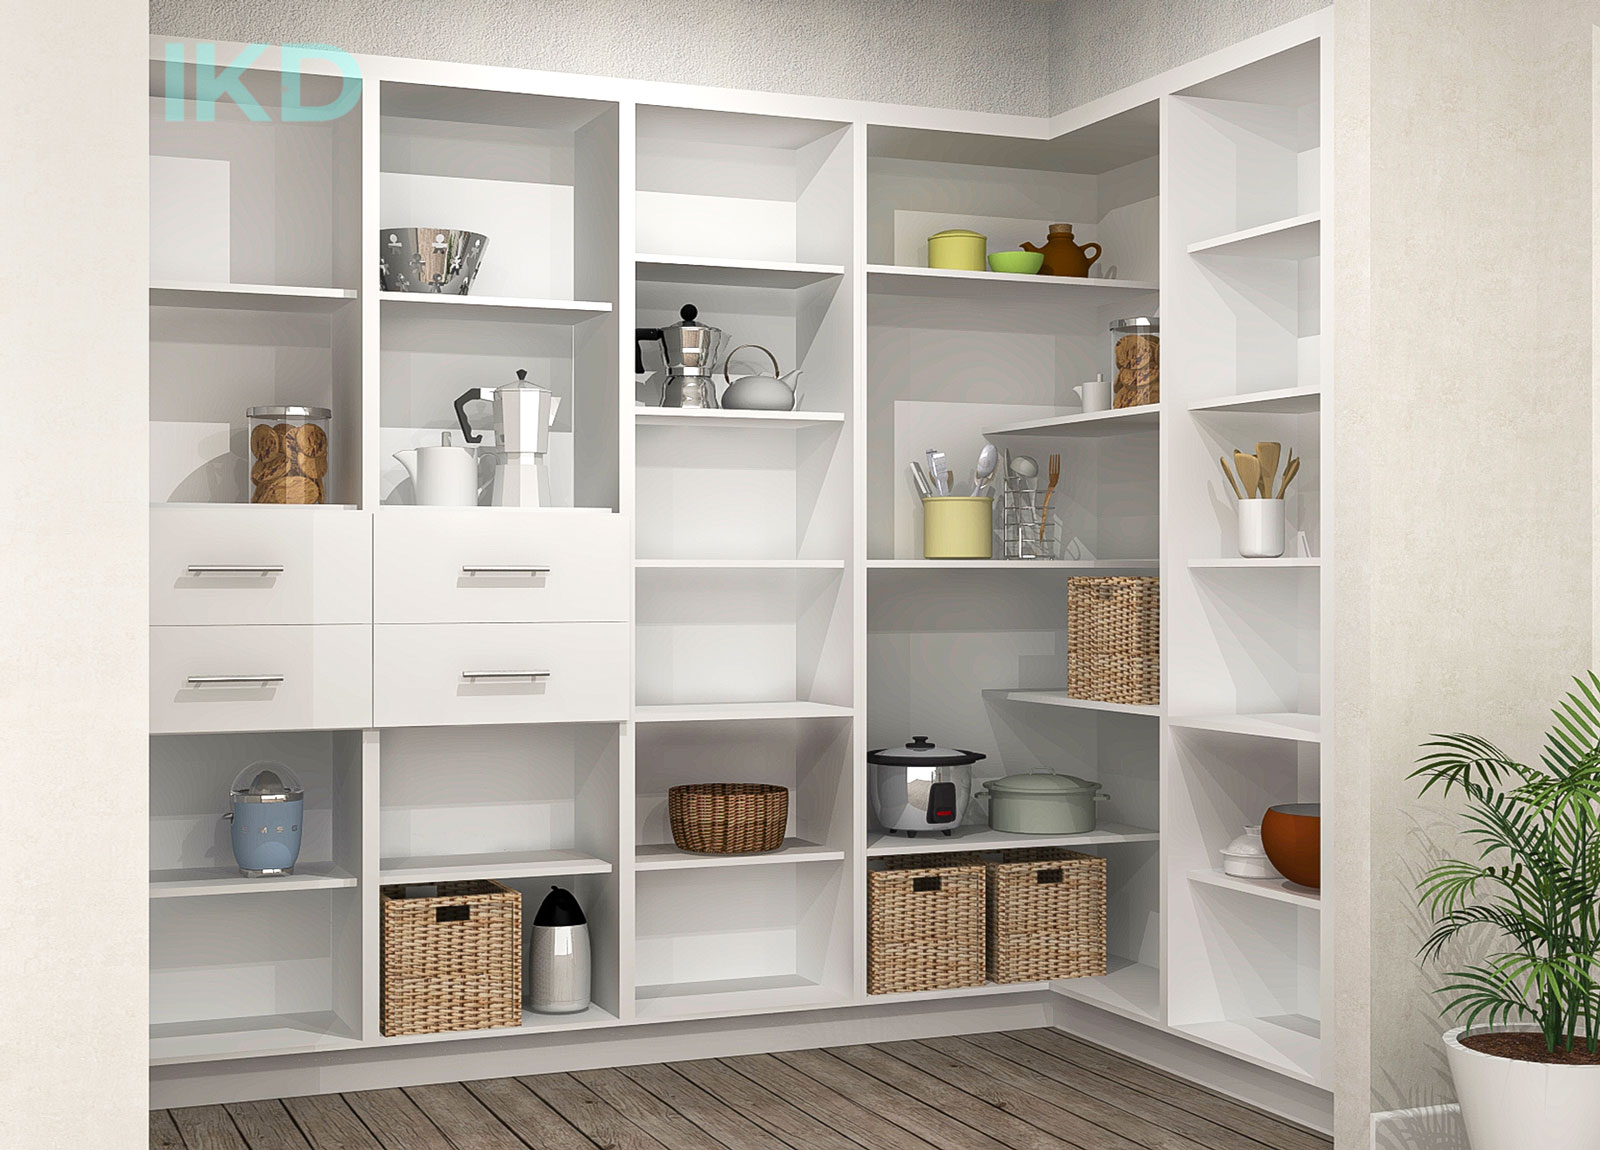 https://inspiredkitchendesign.com/wp-content/uploads/2023/05/1-ikea-pantry-designs-that-add-style.jpg